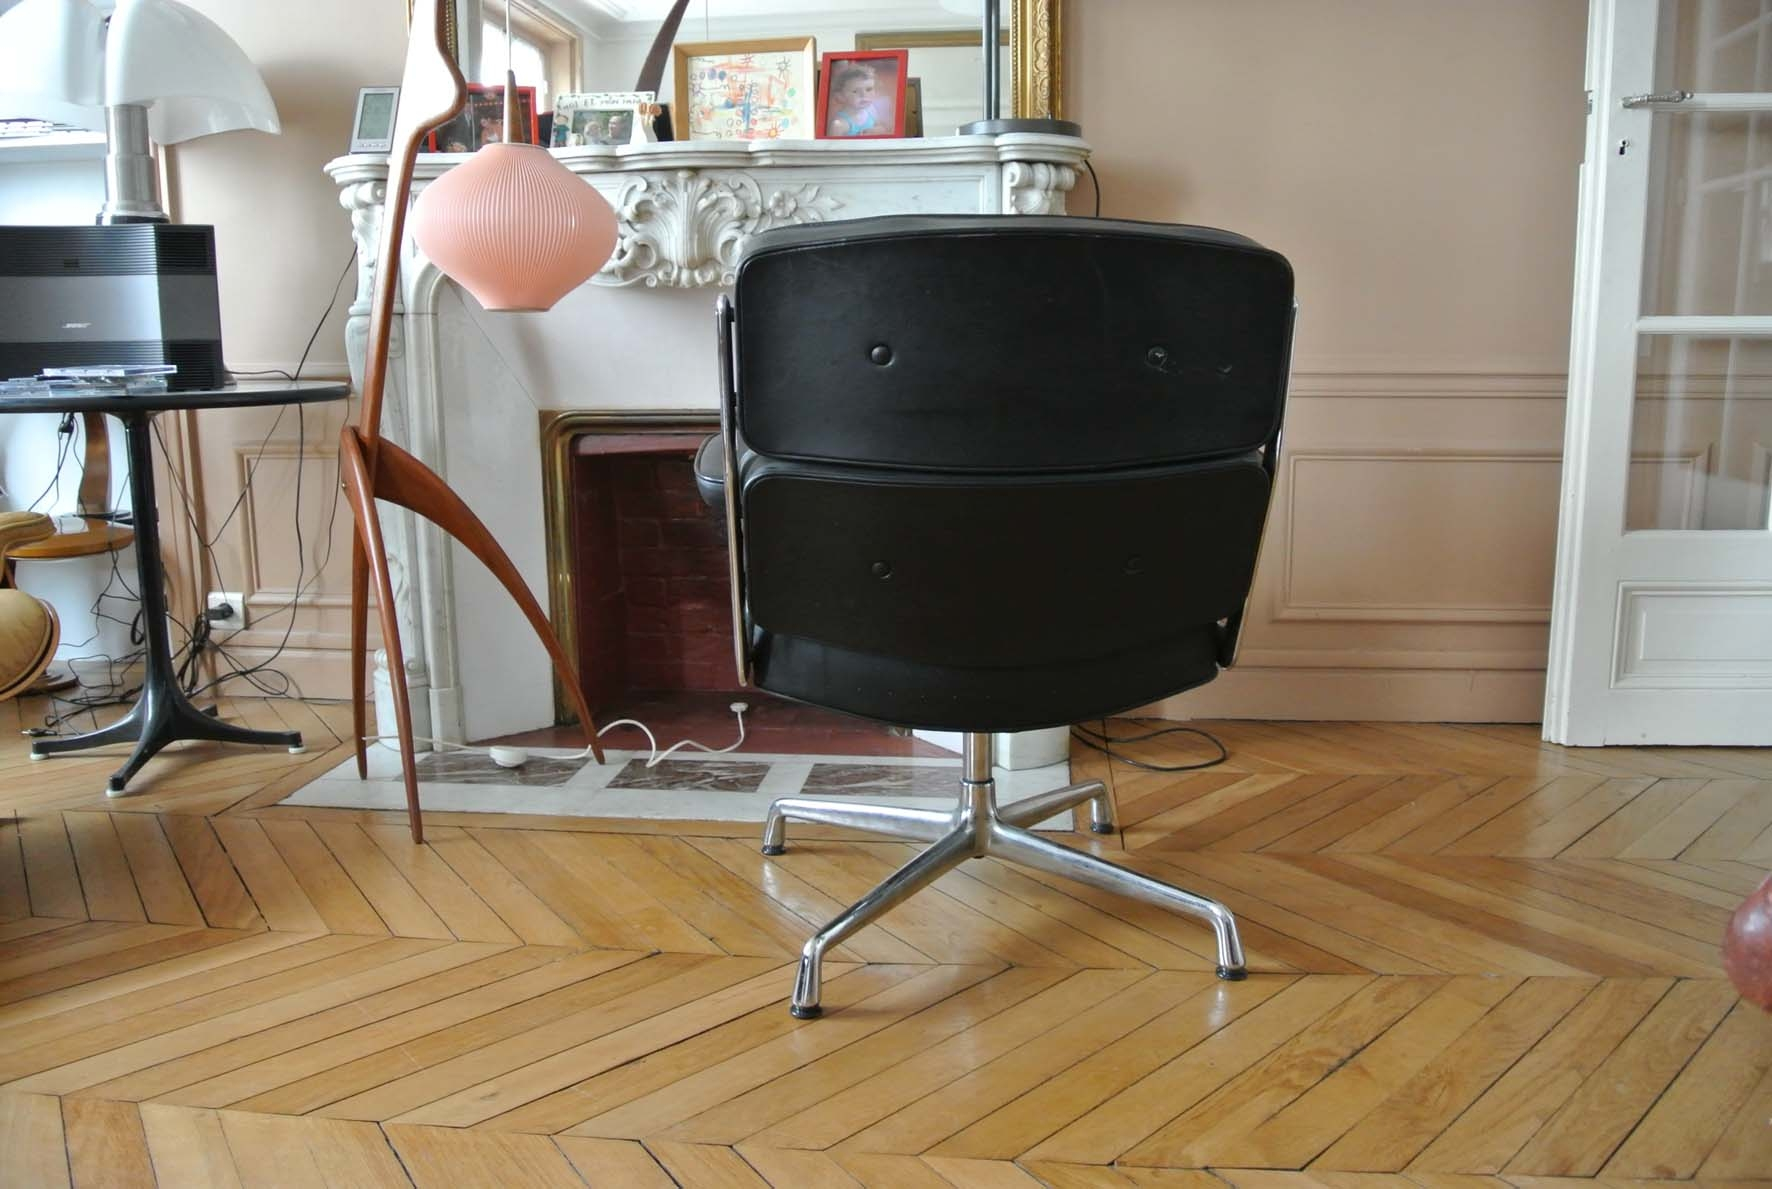 Charles Eames Fauteuil Fauteuil Lobby Chair Charles Eames L atelier 50